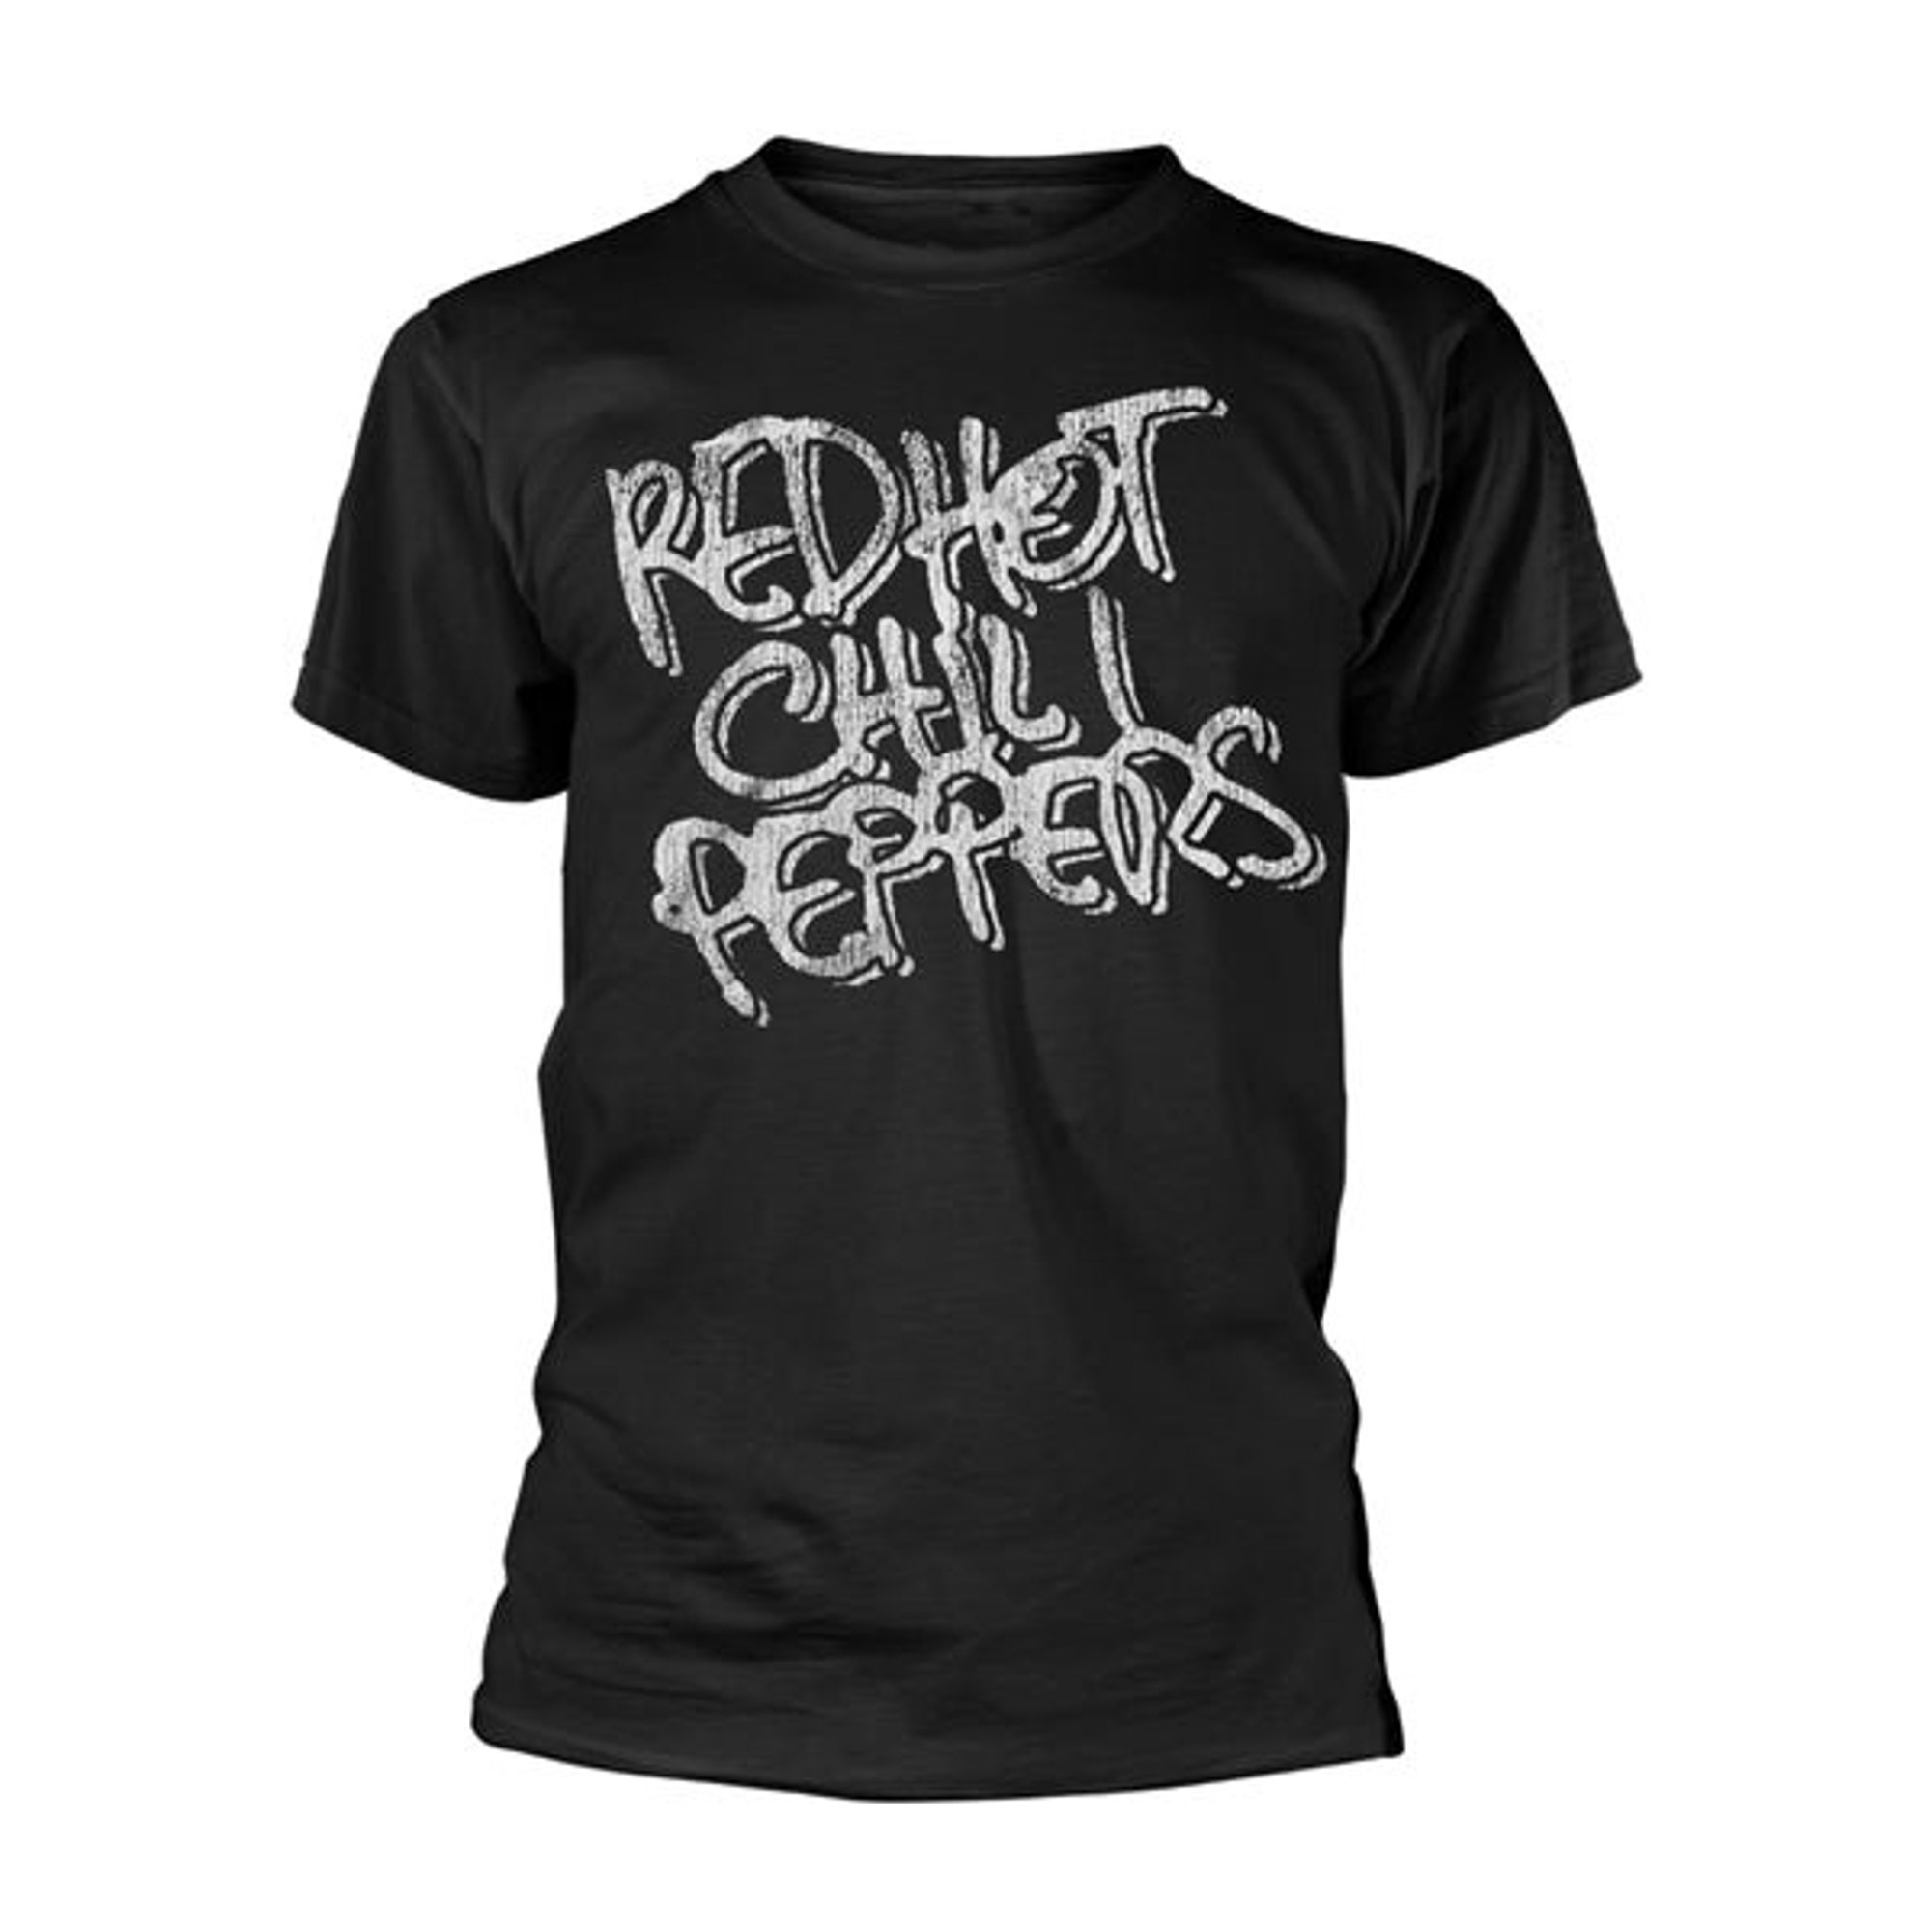 Red Hot Chili Peppers T-Shirt - Black & White Logo